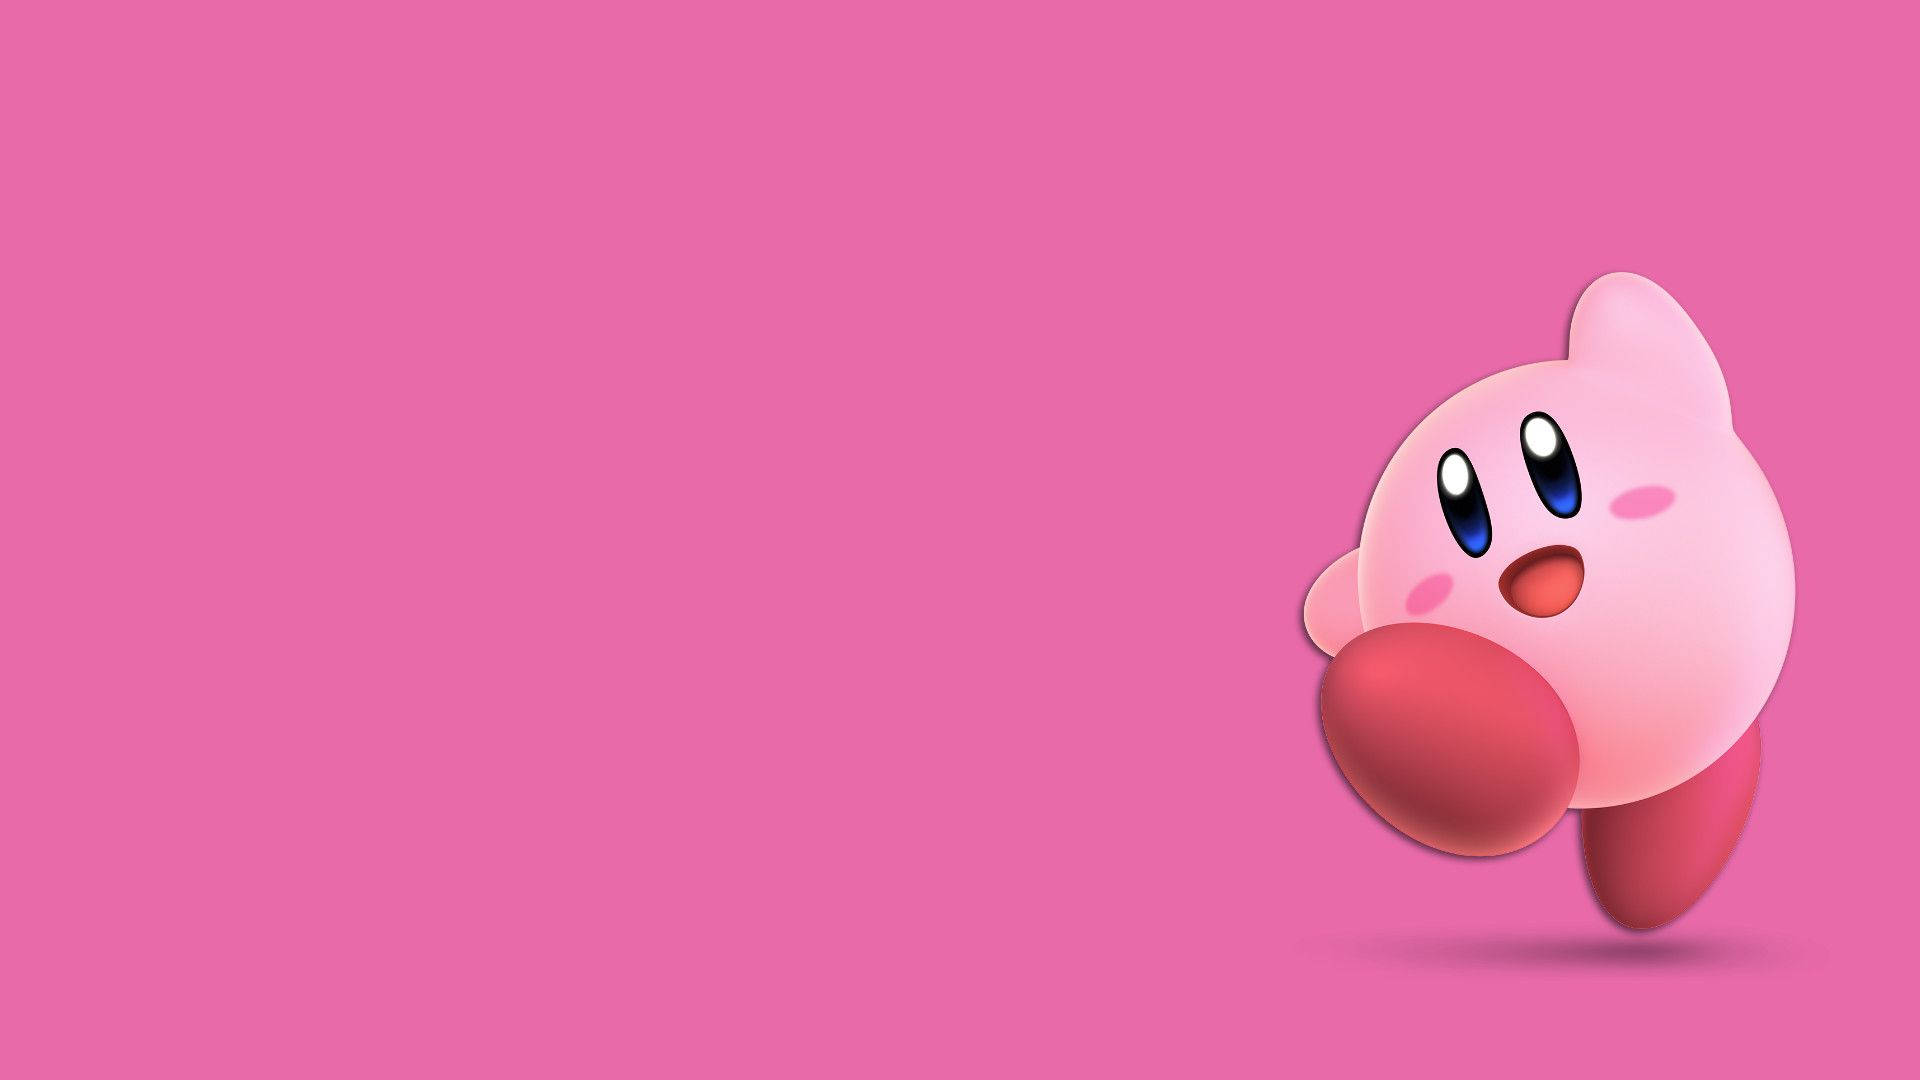 An adorable wallpaper of happy Kirby with pink background